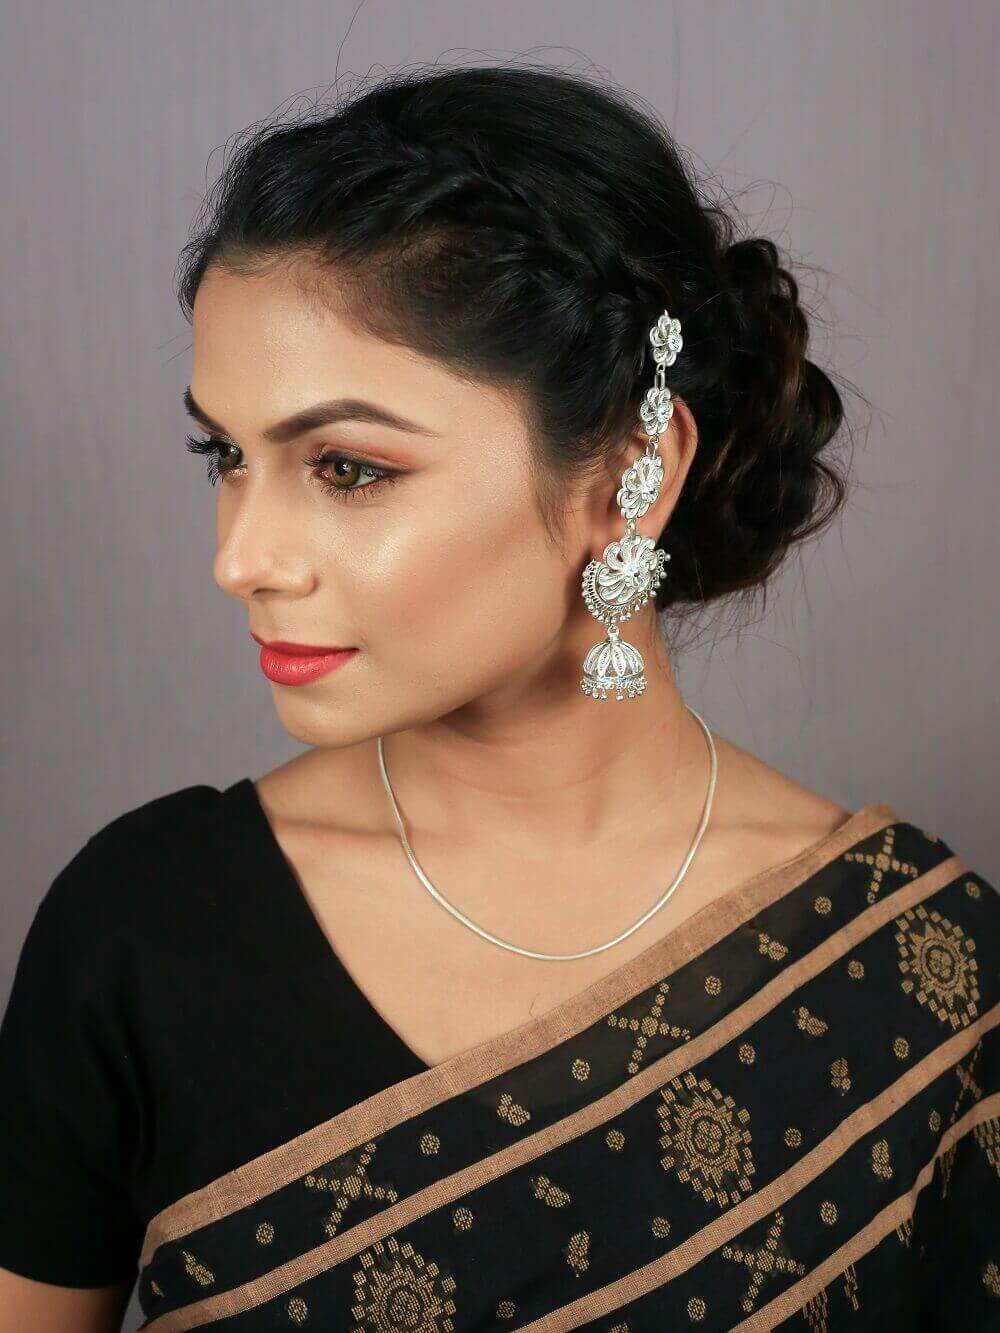 Wedding Traditional Earrings Online Shopping for Women at Low Prices